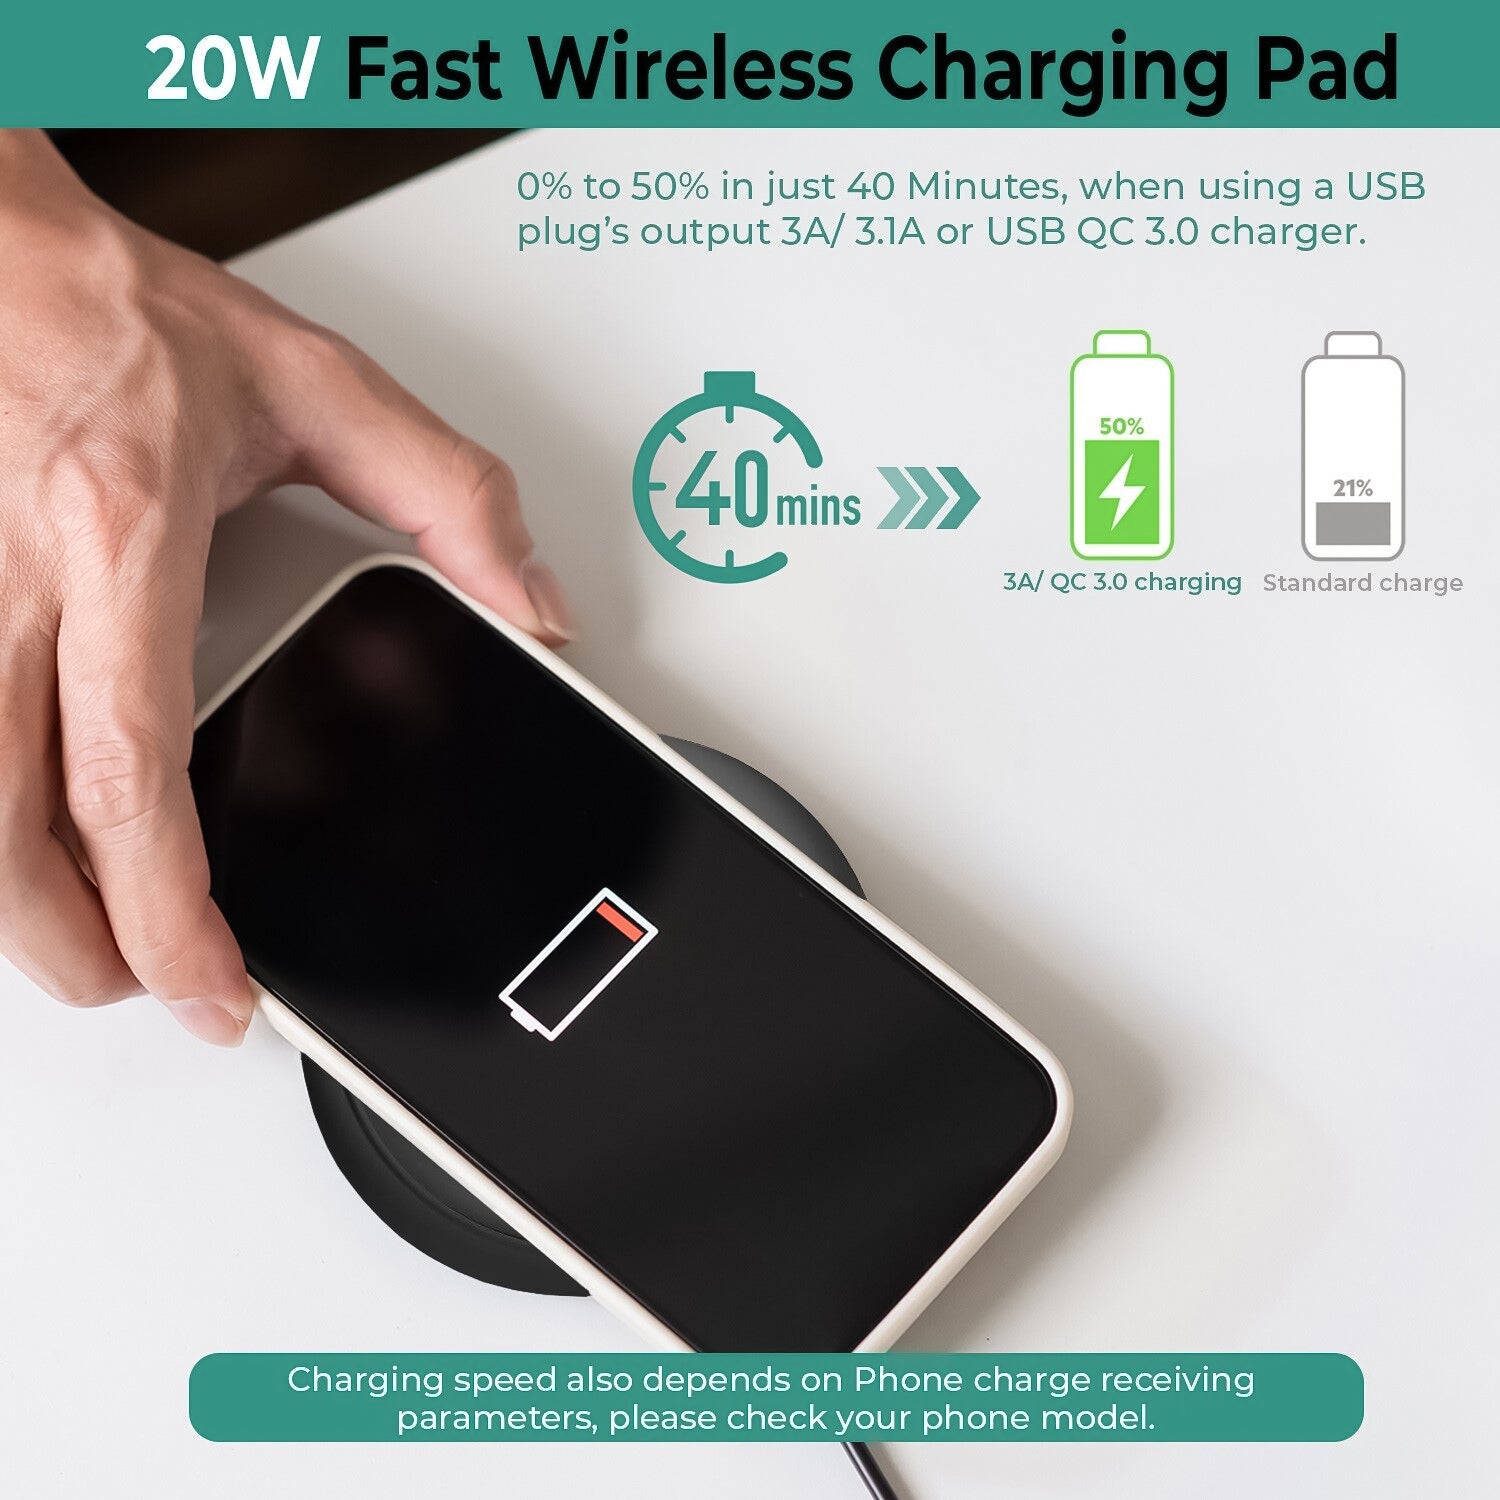 Wireless Phone Charger - 20W Fast Wireless Charger for iPhone & Samsung Galaxy S Series